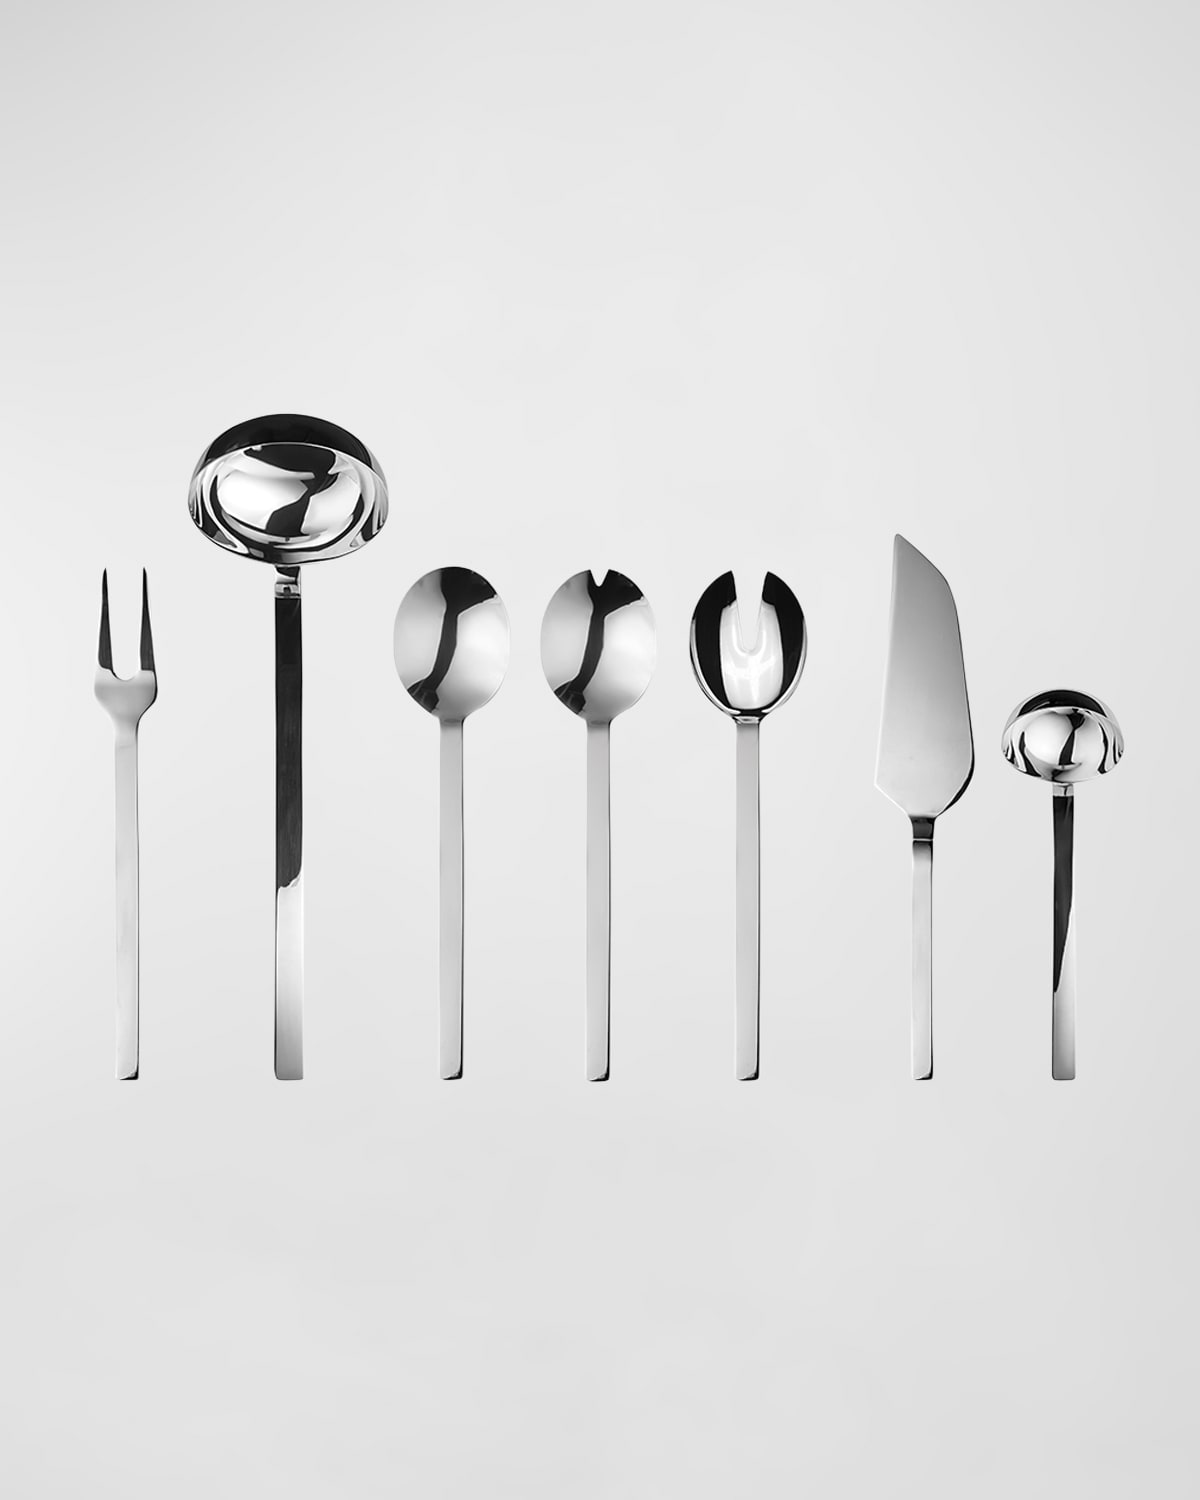 Mepra Stile 7-piece Place Serving Set In Stainless Steel